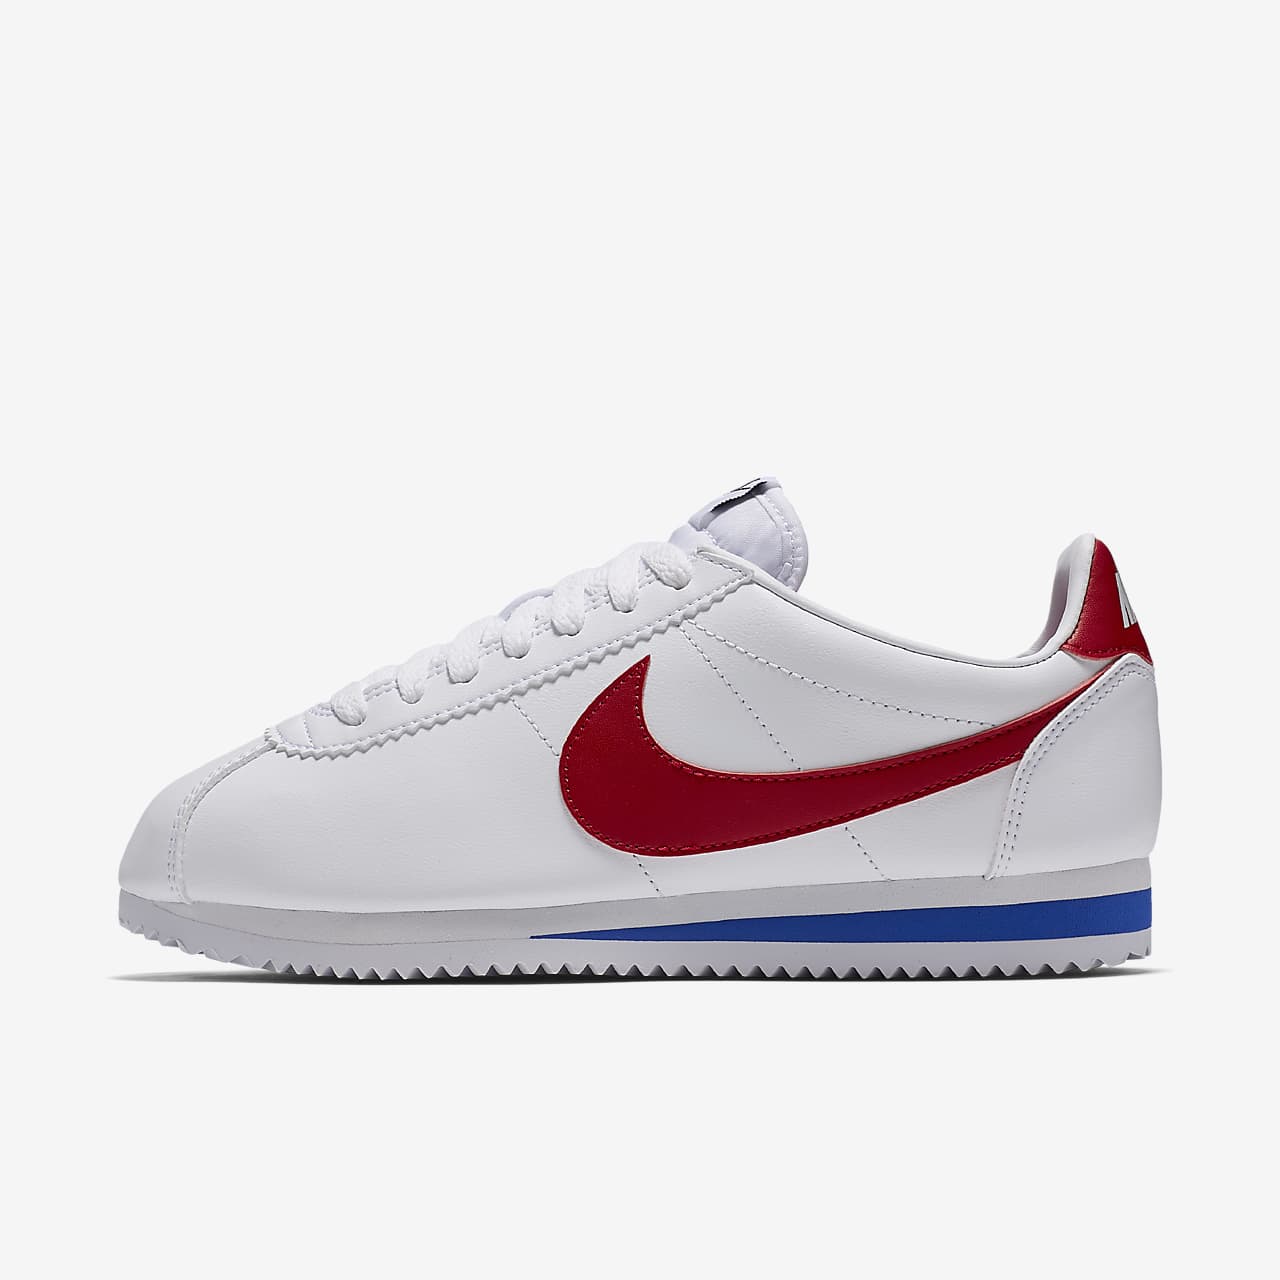 First Ever Nike Cortez Flash Sales, UP TO 55% OFF | www